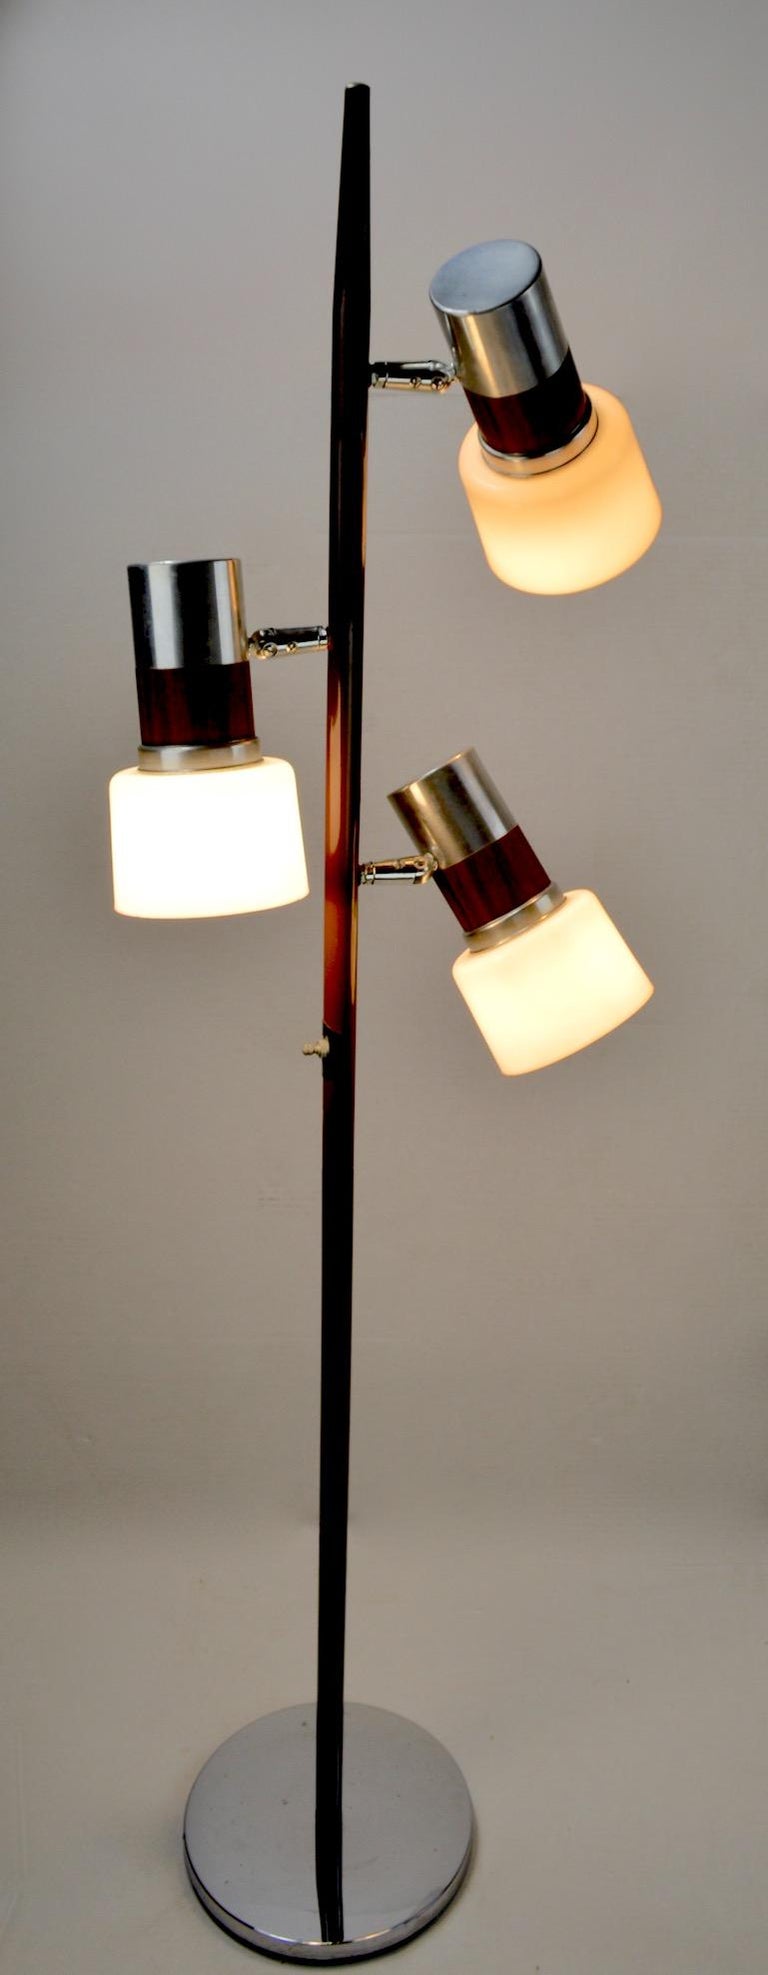 3-Light Mid Century Floor Lamp with Adjustable Shades Attributed to